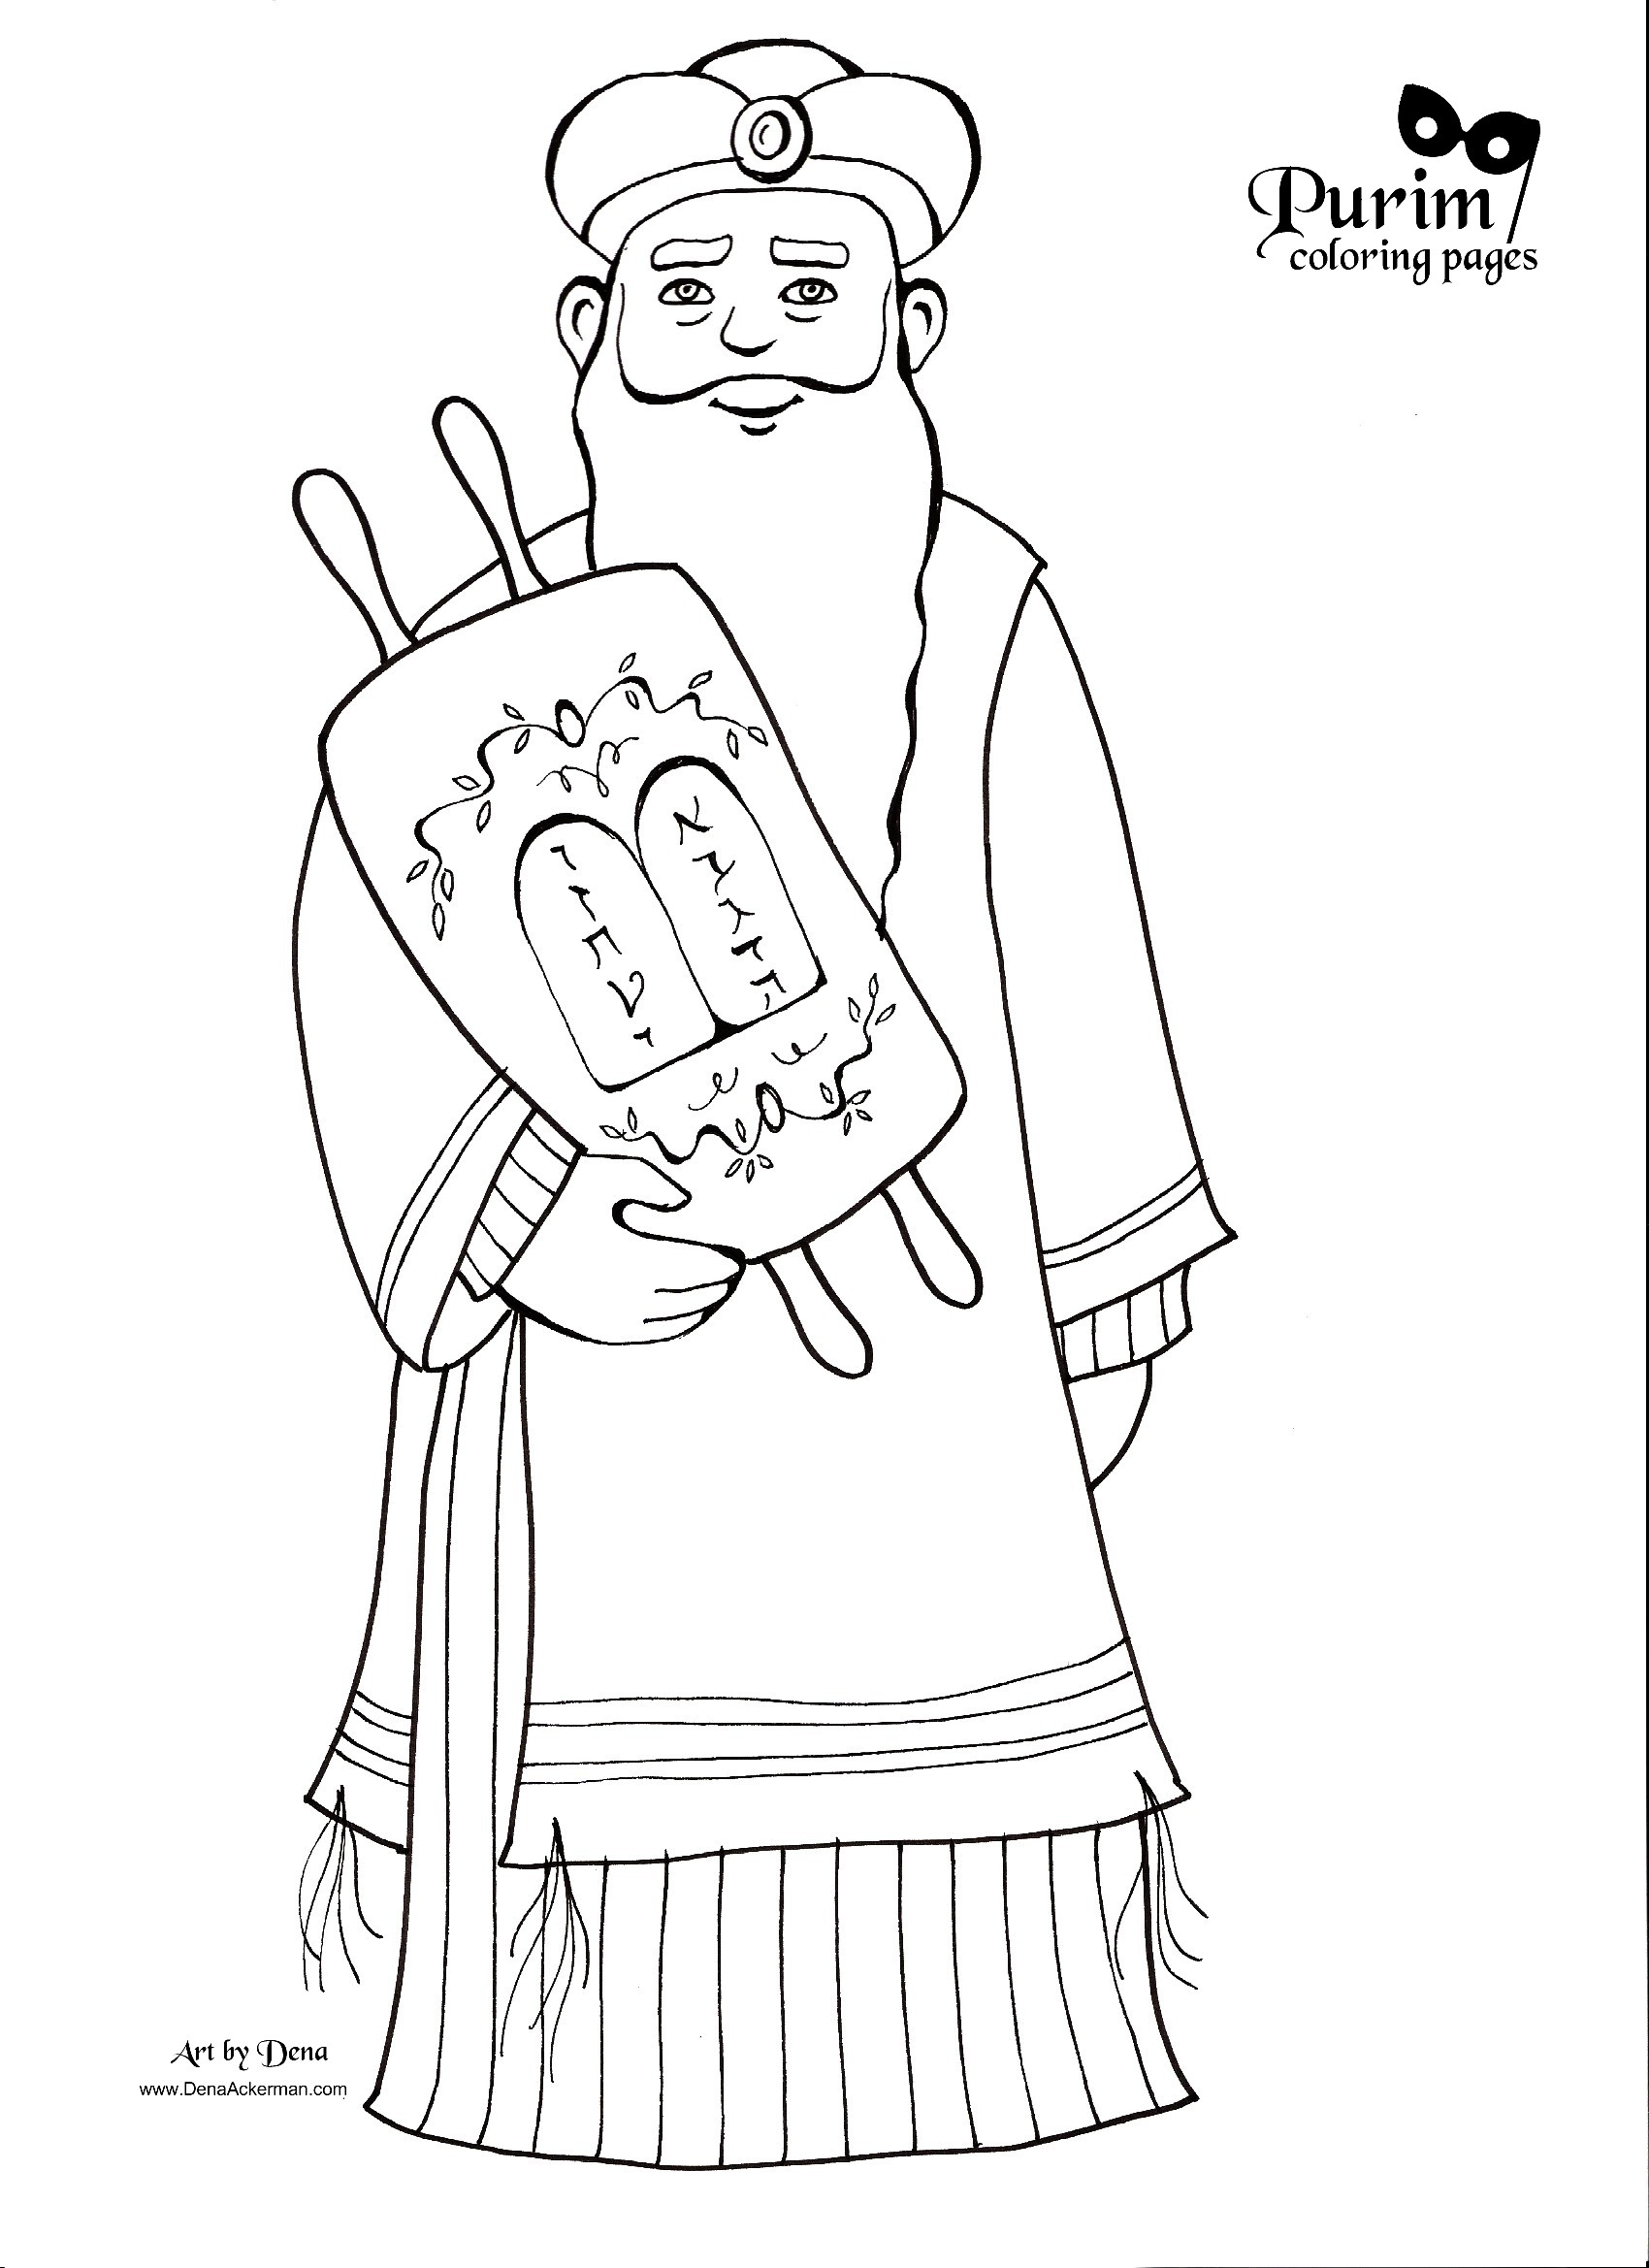 Queen Esther Coloring Pages Printable at GetColorings.com | Free ...